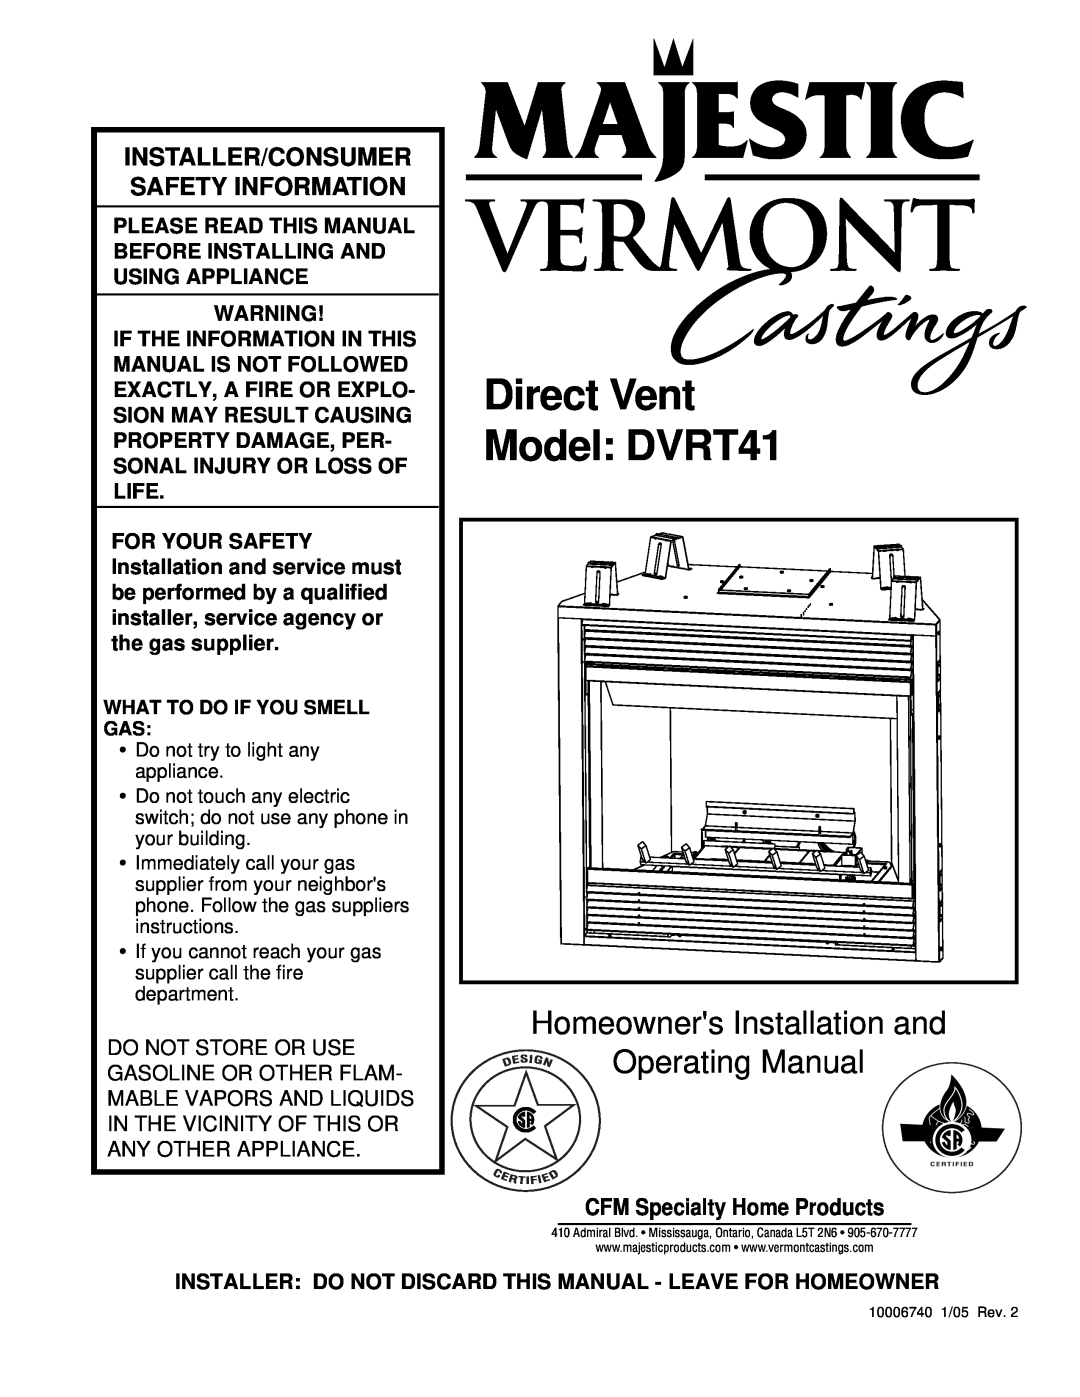 Vermont Casting manual Direct Vent Model DVRT41, CFM Specialty Home Products, Homeowners Installation and 